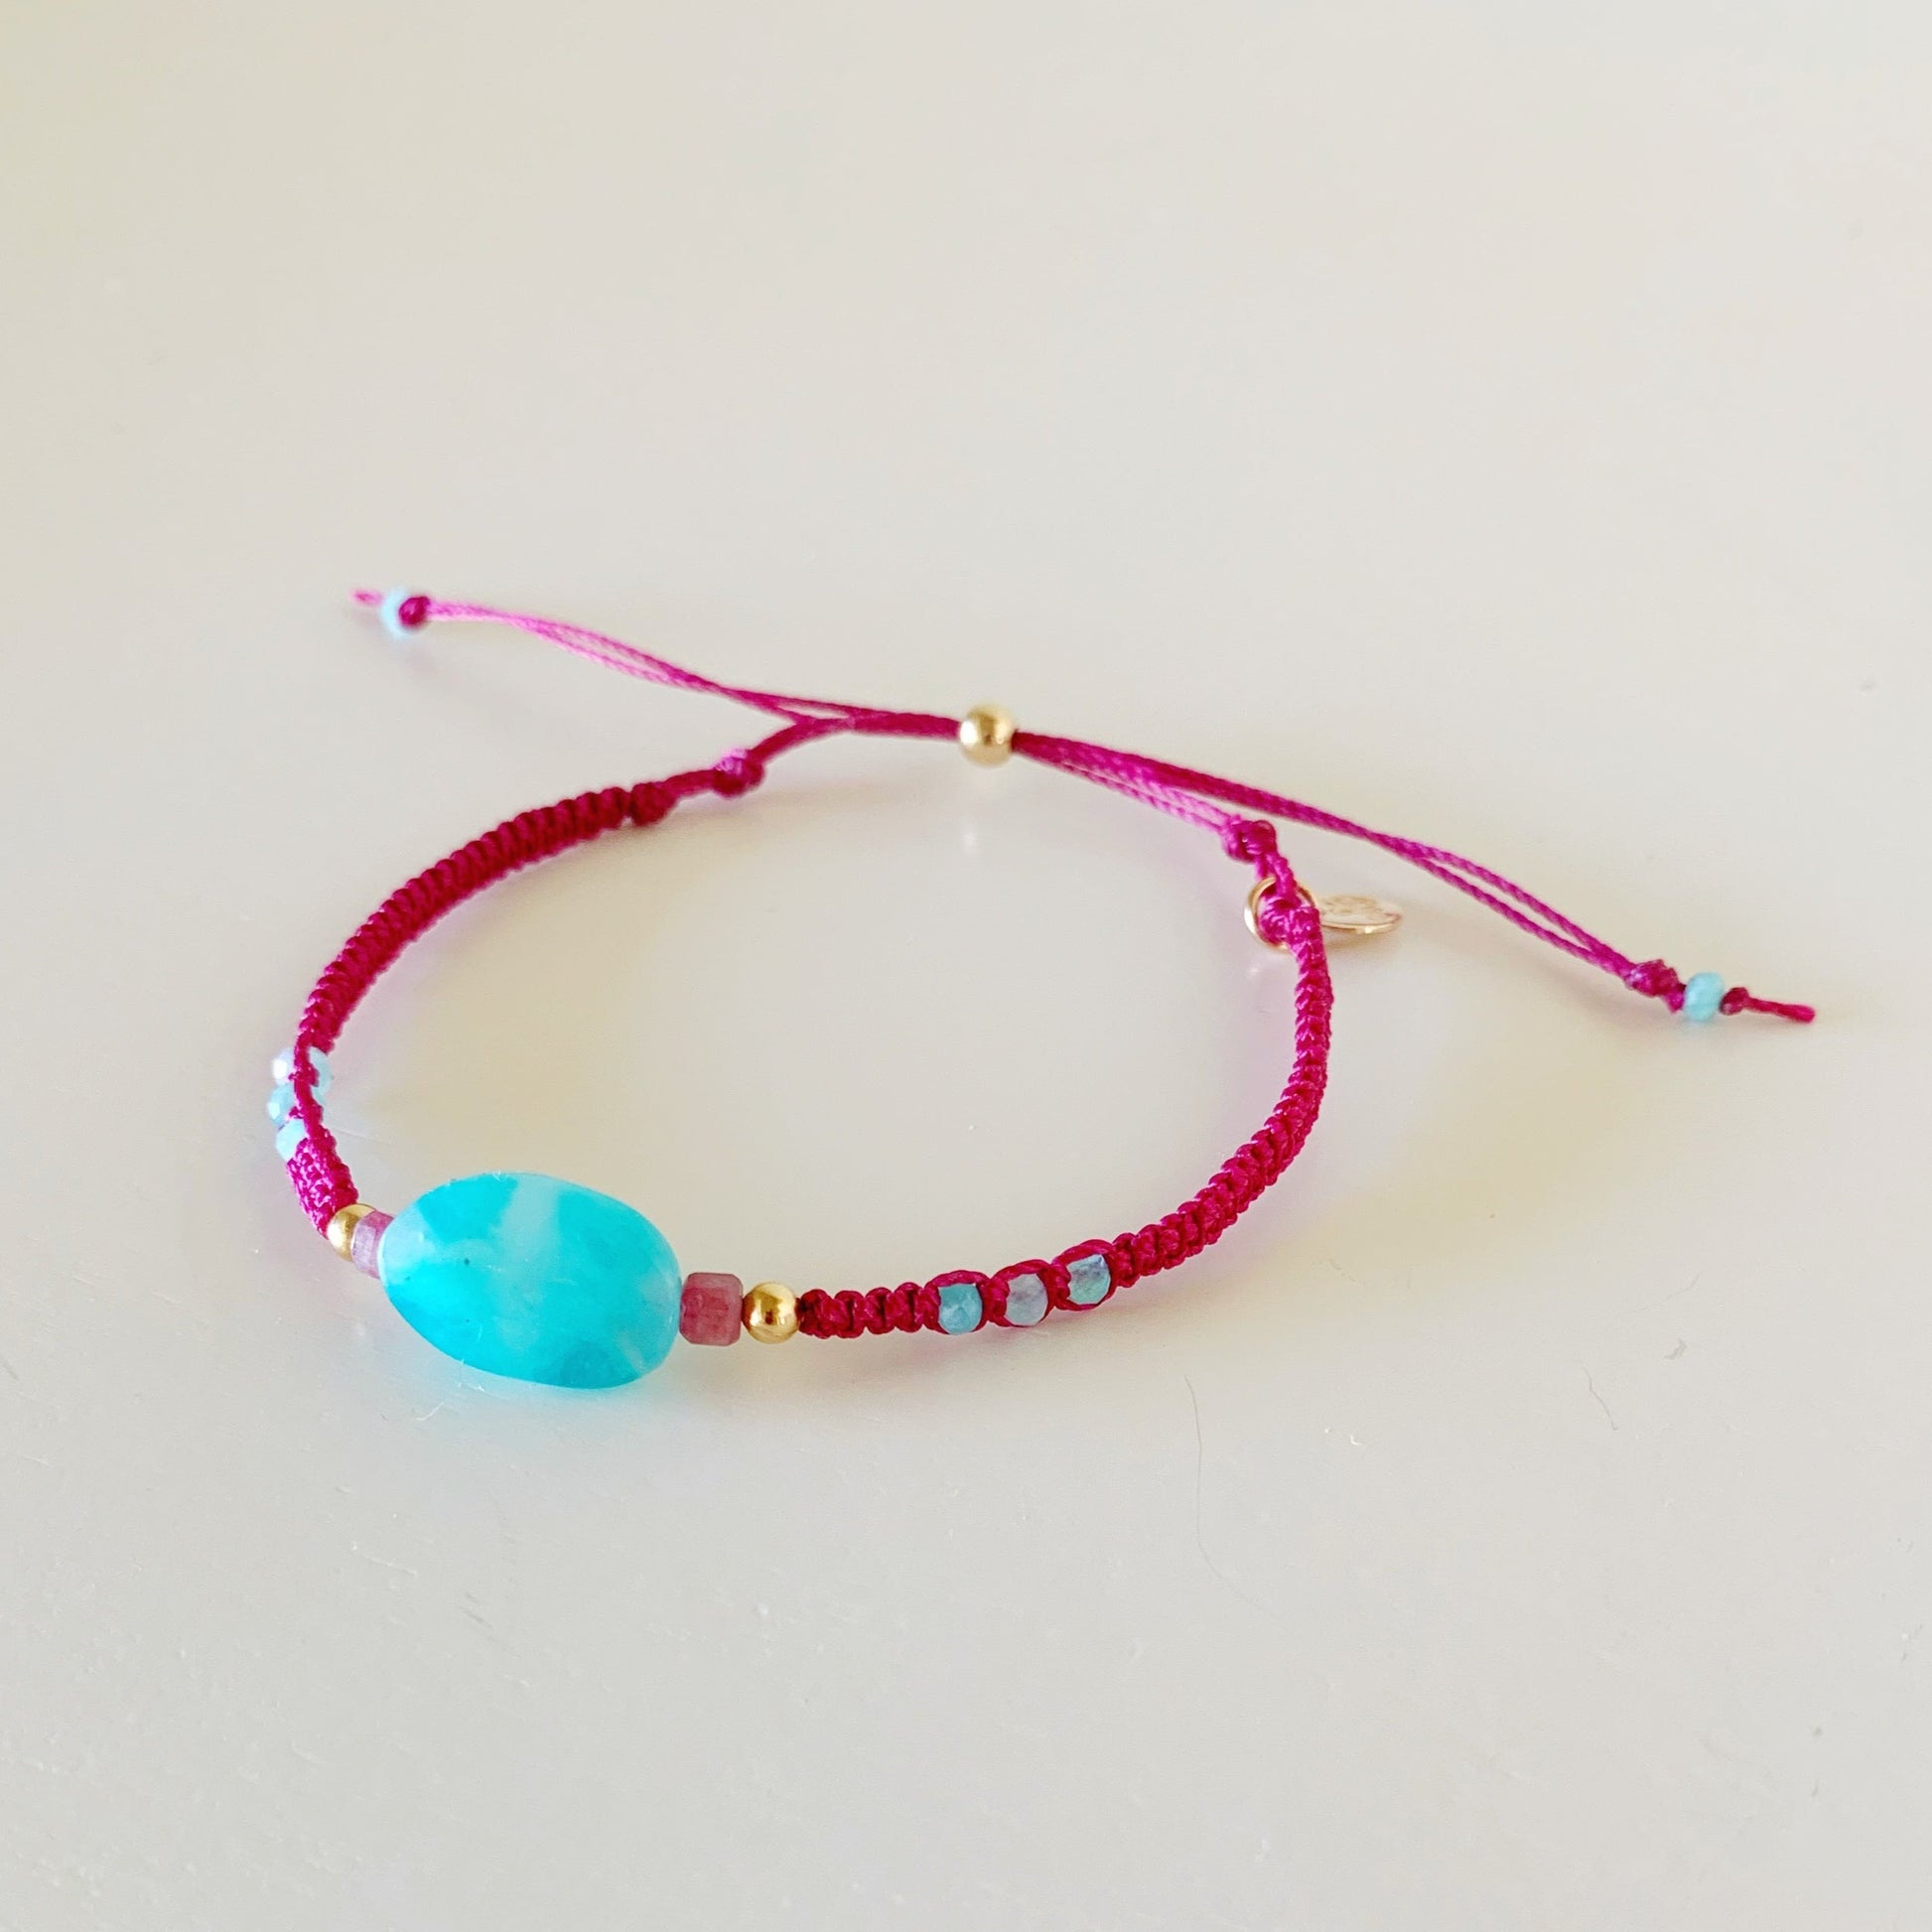 the coastal cranberry harwich port adjustable macrame bracelet by mermaids and madeleines is an adjustable friendship bracelet style with an oval amazonite bead at the center and sides complimented by pink tourmaline and 14k gold filled beads. this bracelet is facing to the left and photographed flat on a white surface